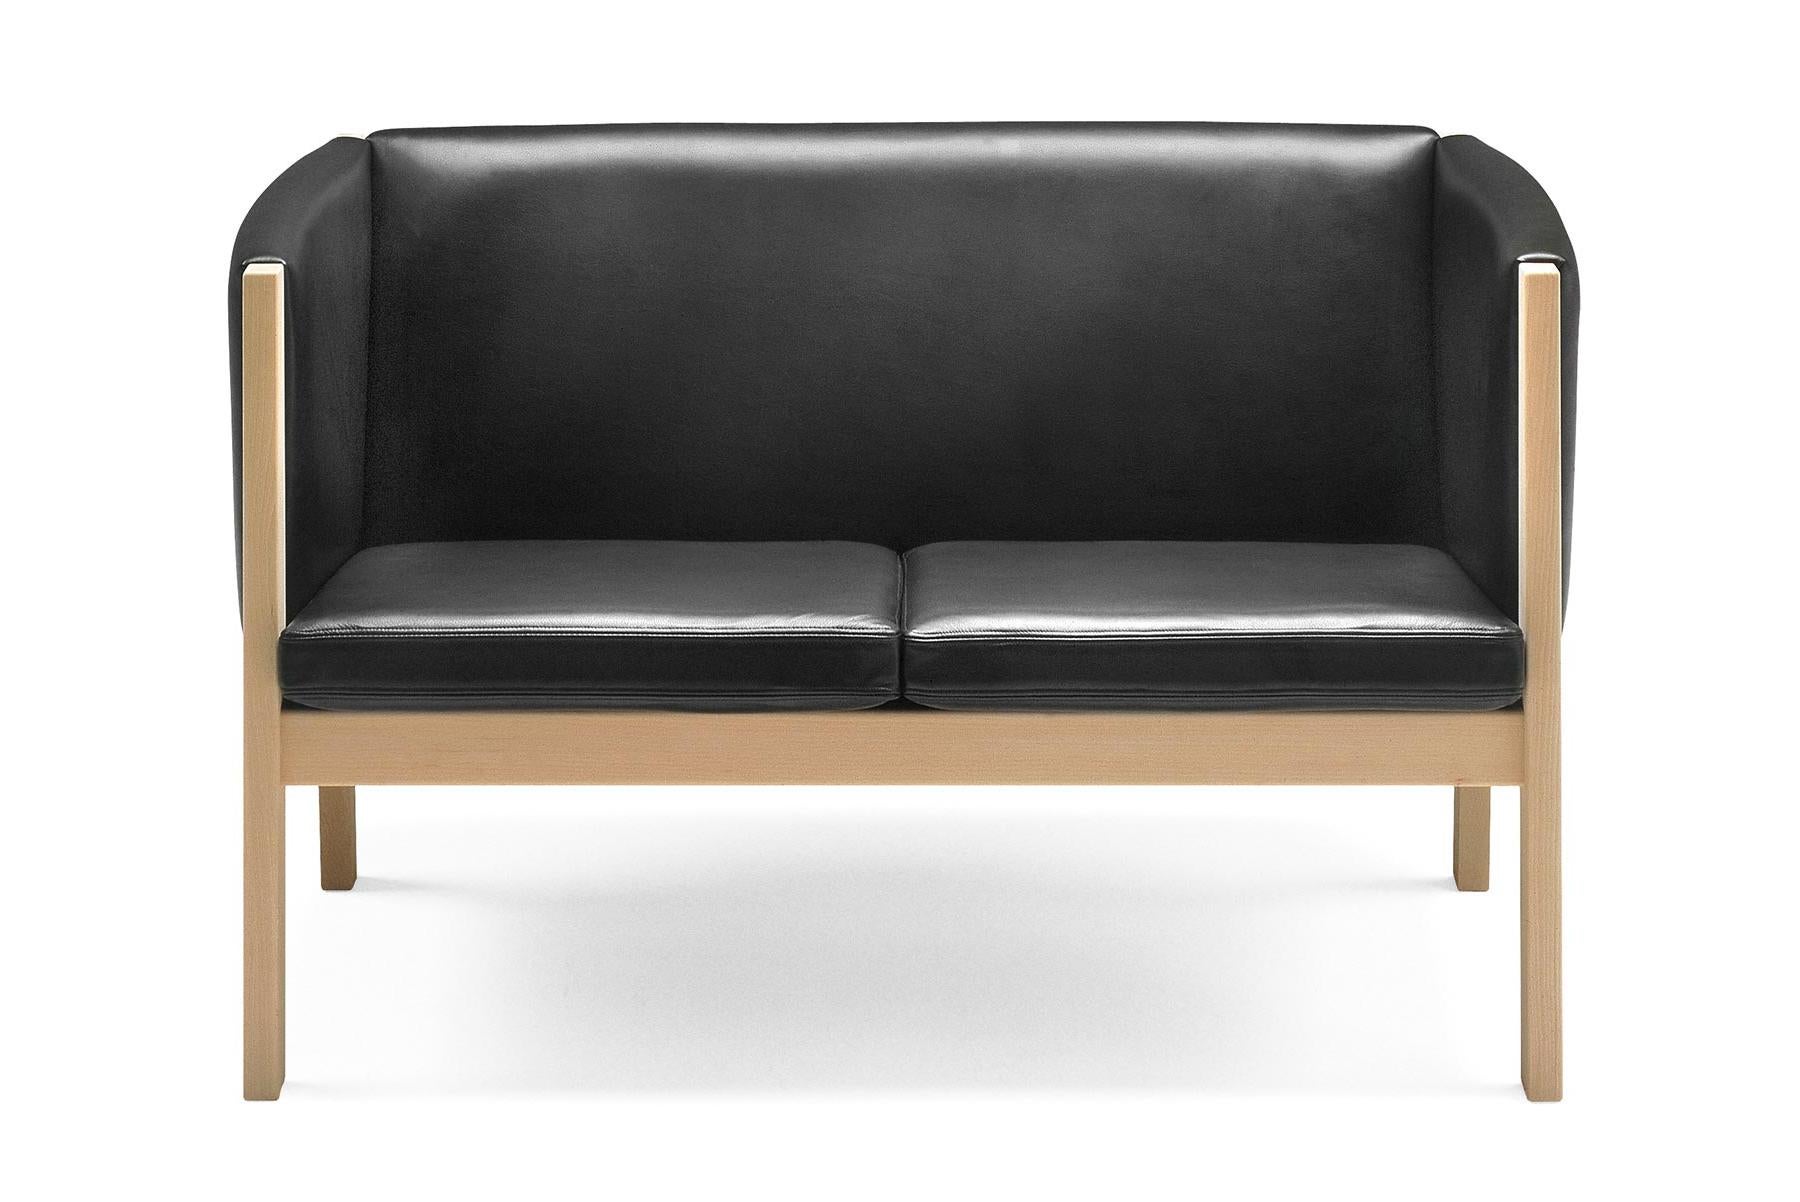 Designed by Hans Wegner for GETAMA in 1985, the 285 sofa features unparalleled craftsmanship and ergonomics. Flawless joinery throughout. The chair is hand built at GETAMA’s factory in Gedsted, Denmark by skilled cabinetmakers using traditional